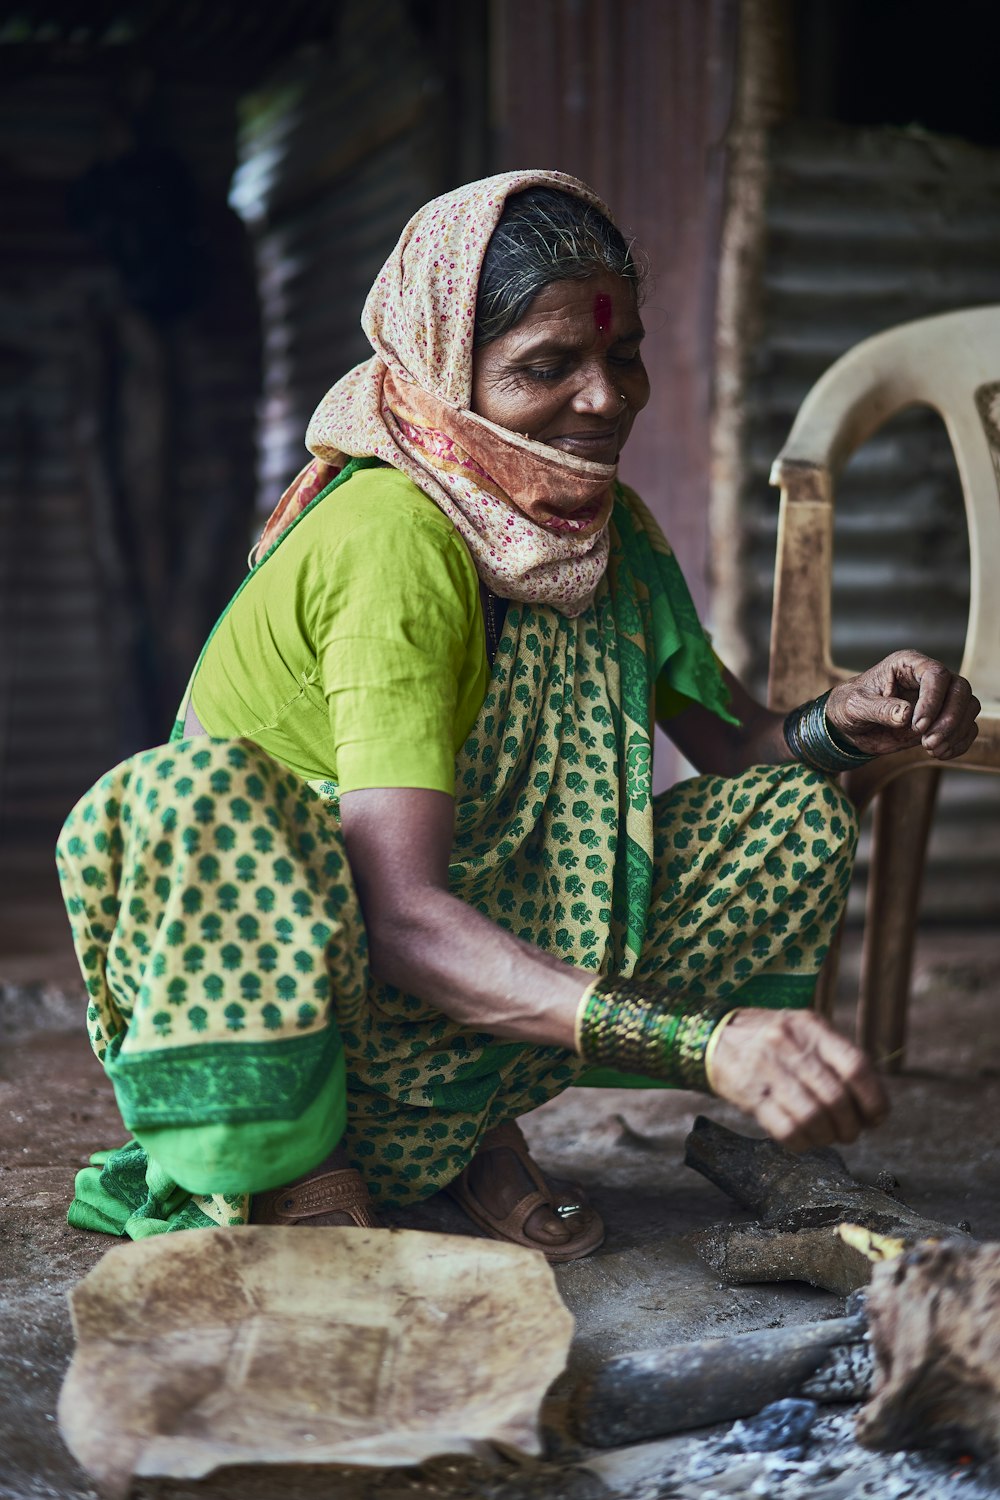 a woman sitting on the ground working on a piece of wood